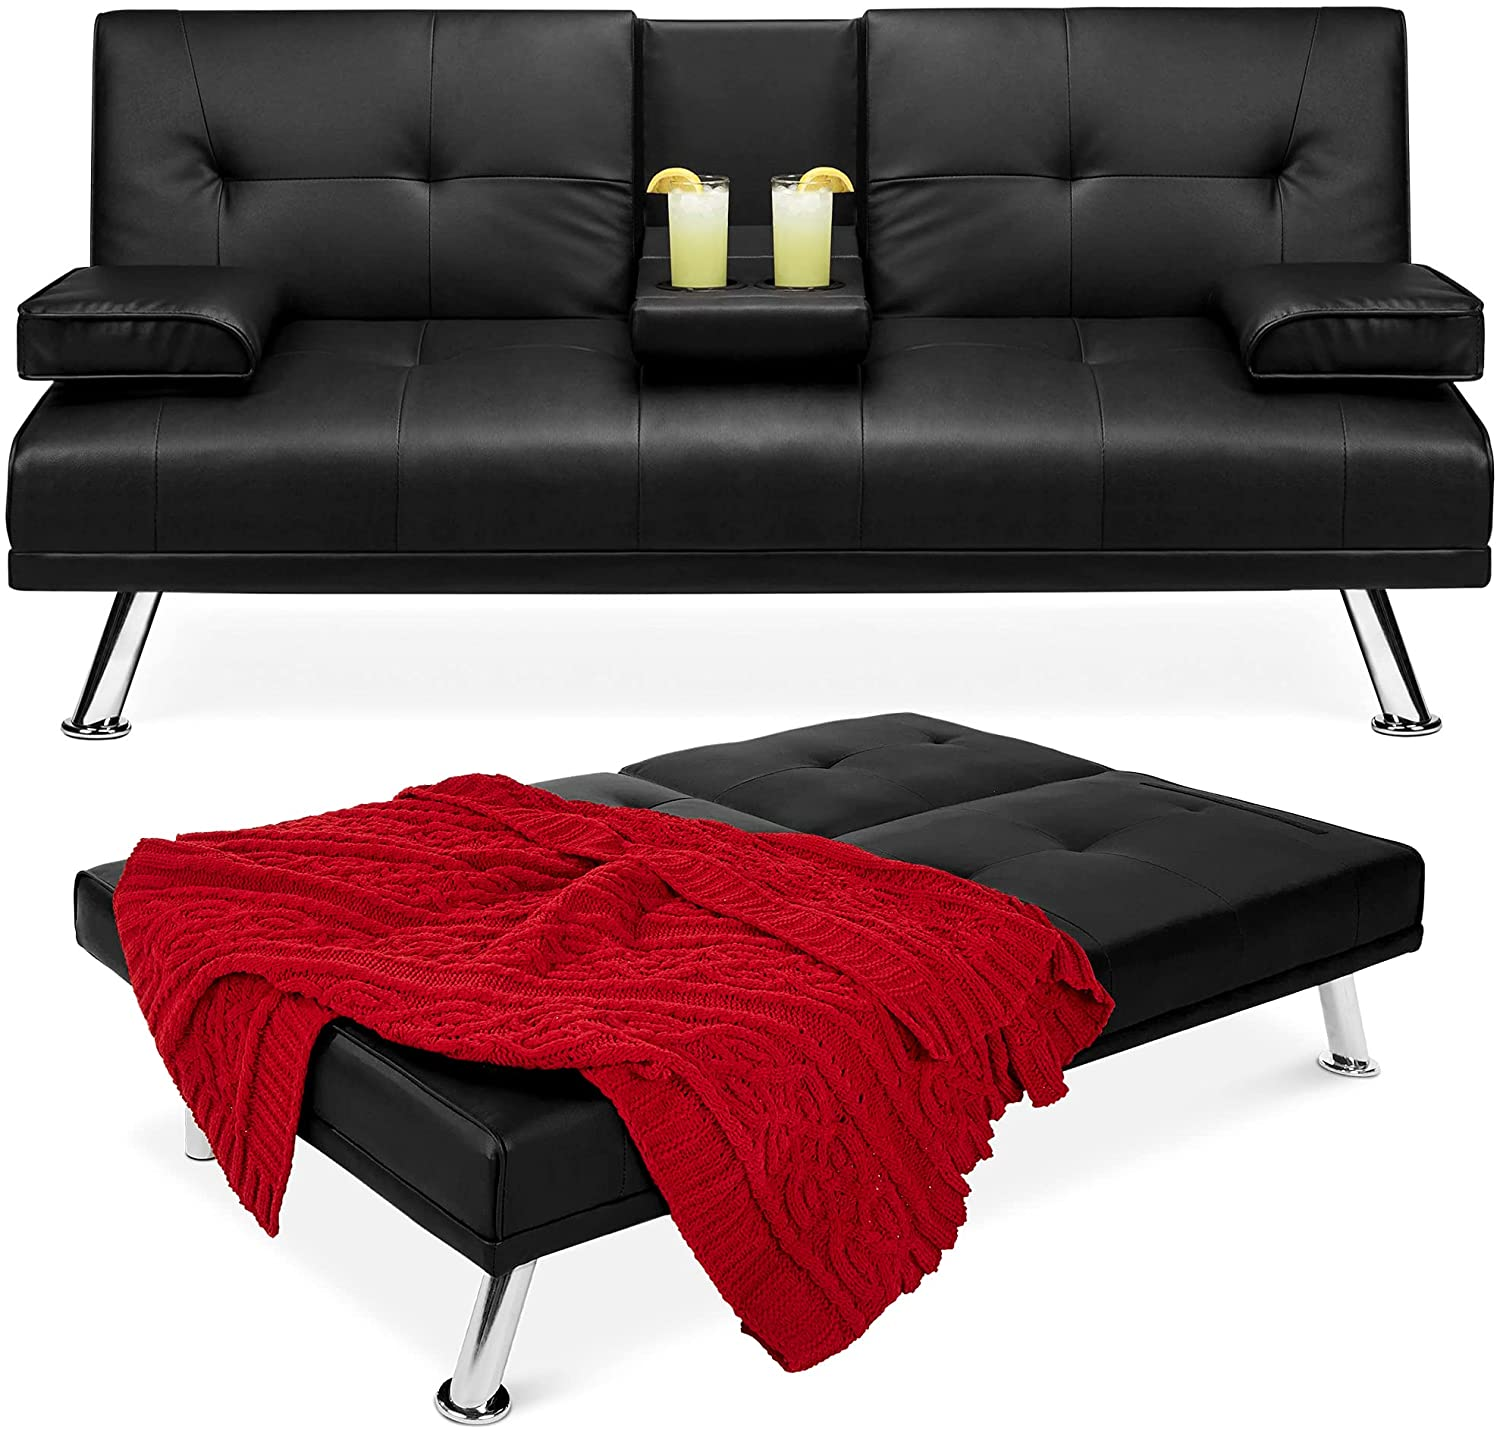 9 Cheap Futon Options that Don't Scream “College Dorm” The Real Deal by  RetailMeNot